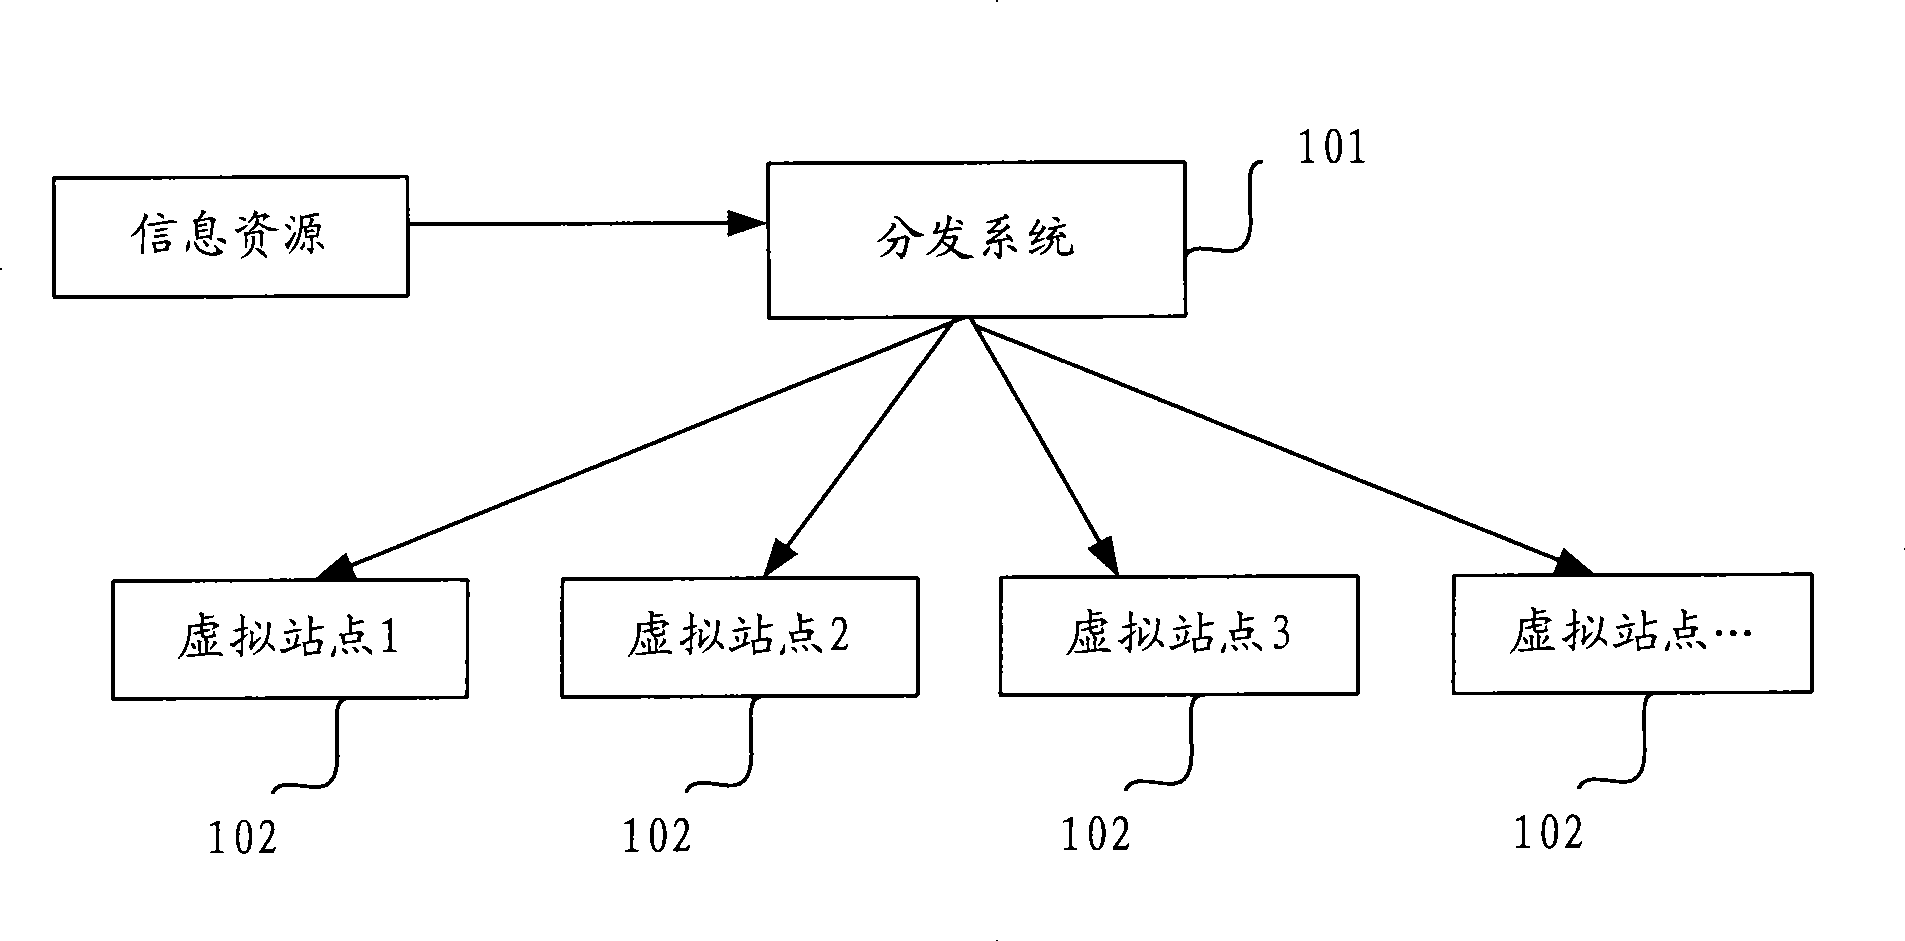 Method and system enhancing network information resource distribution